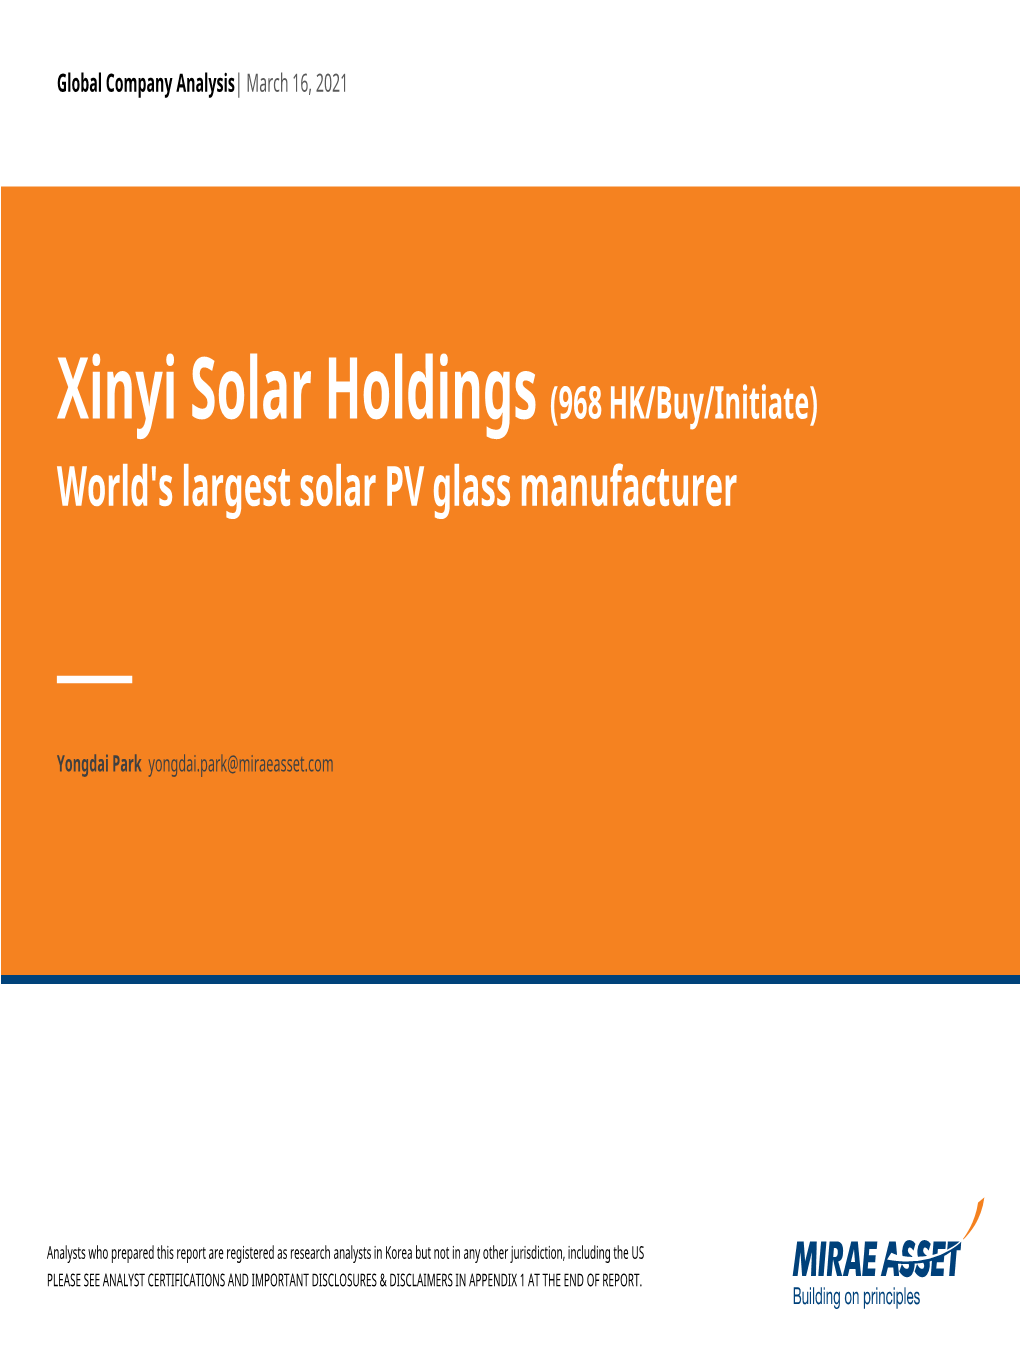 Xinyi Solar Holdings (968 HK/Buy/Initiate) World's Largest Solar PV Glass Manufacturer